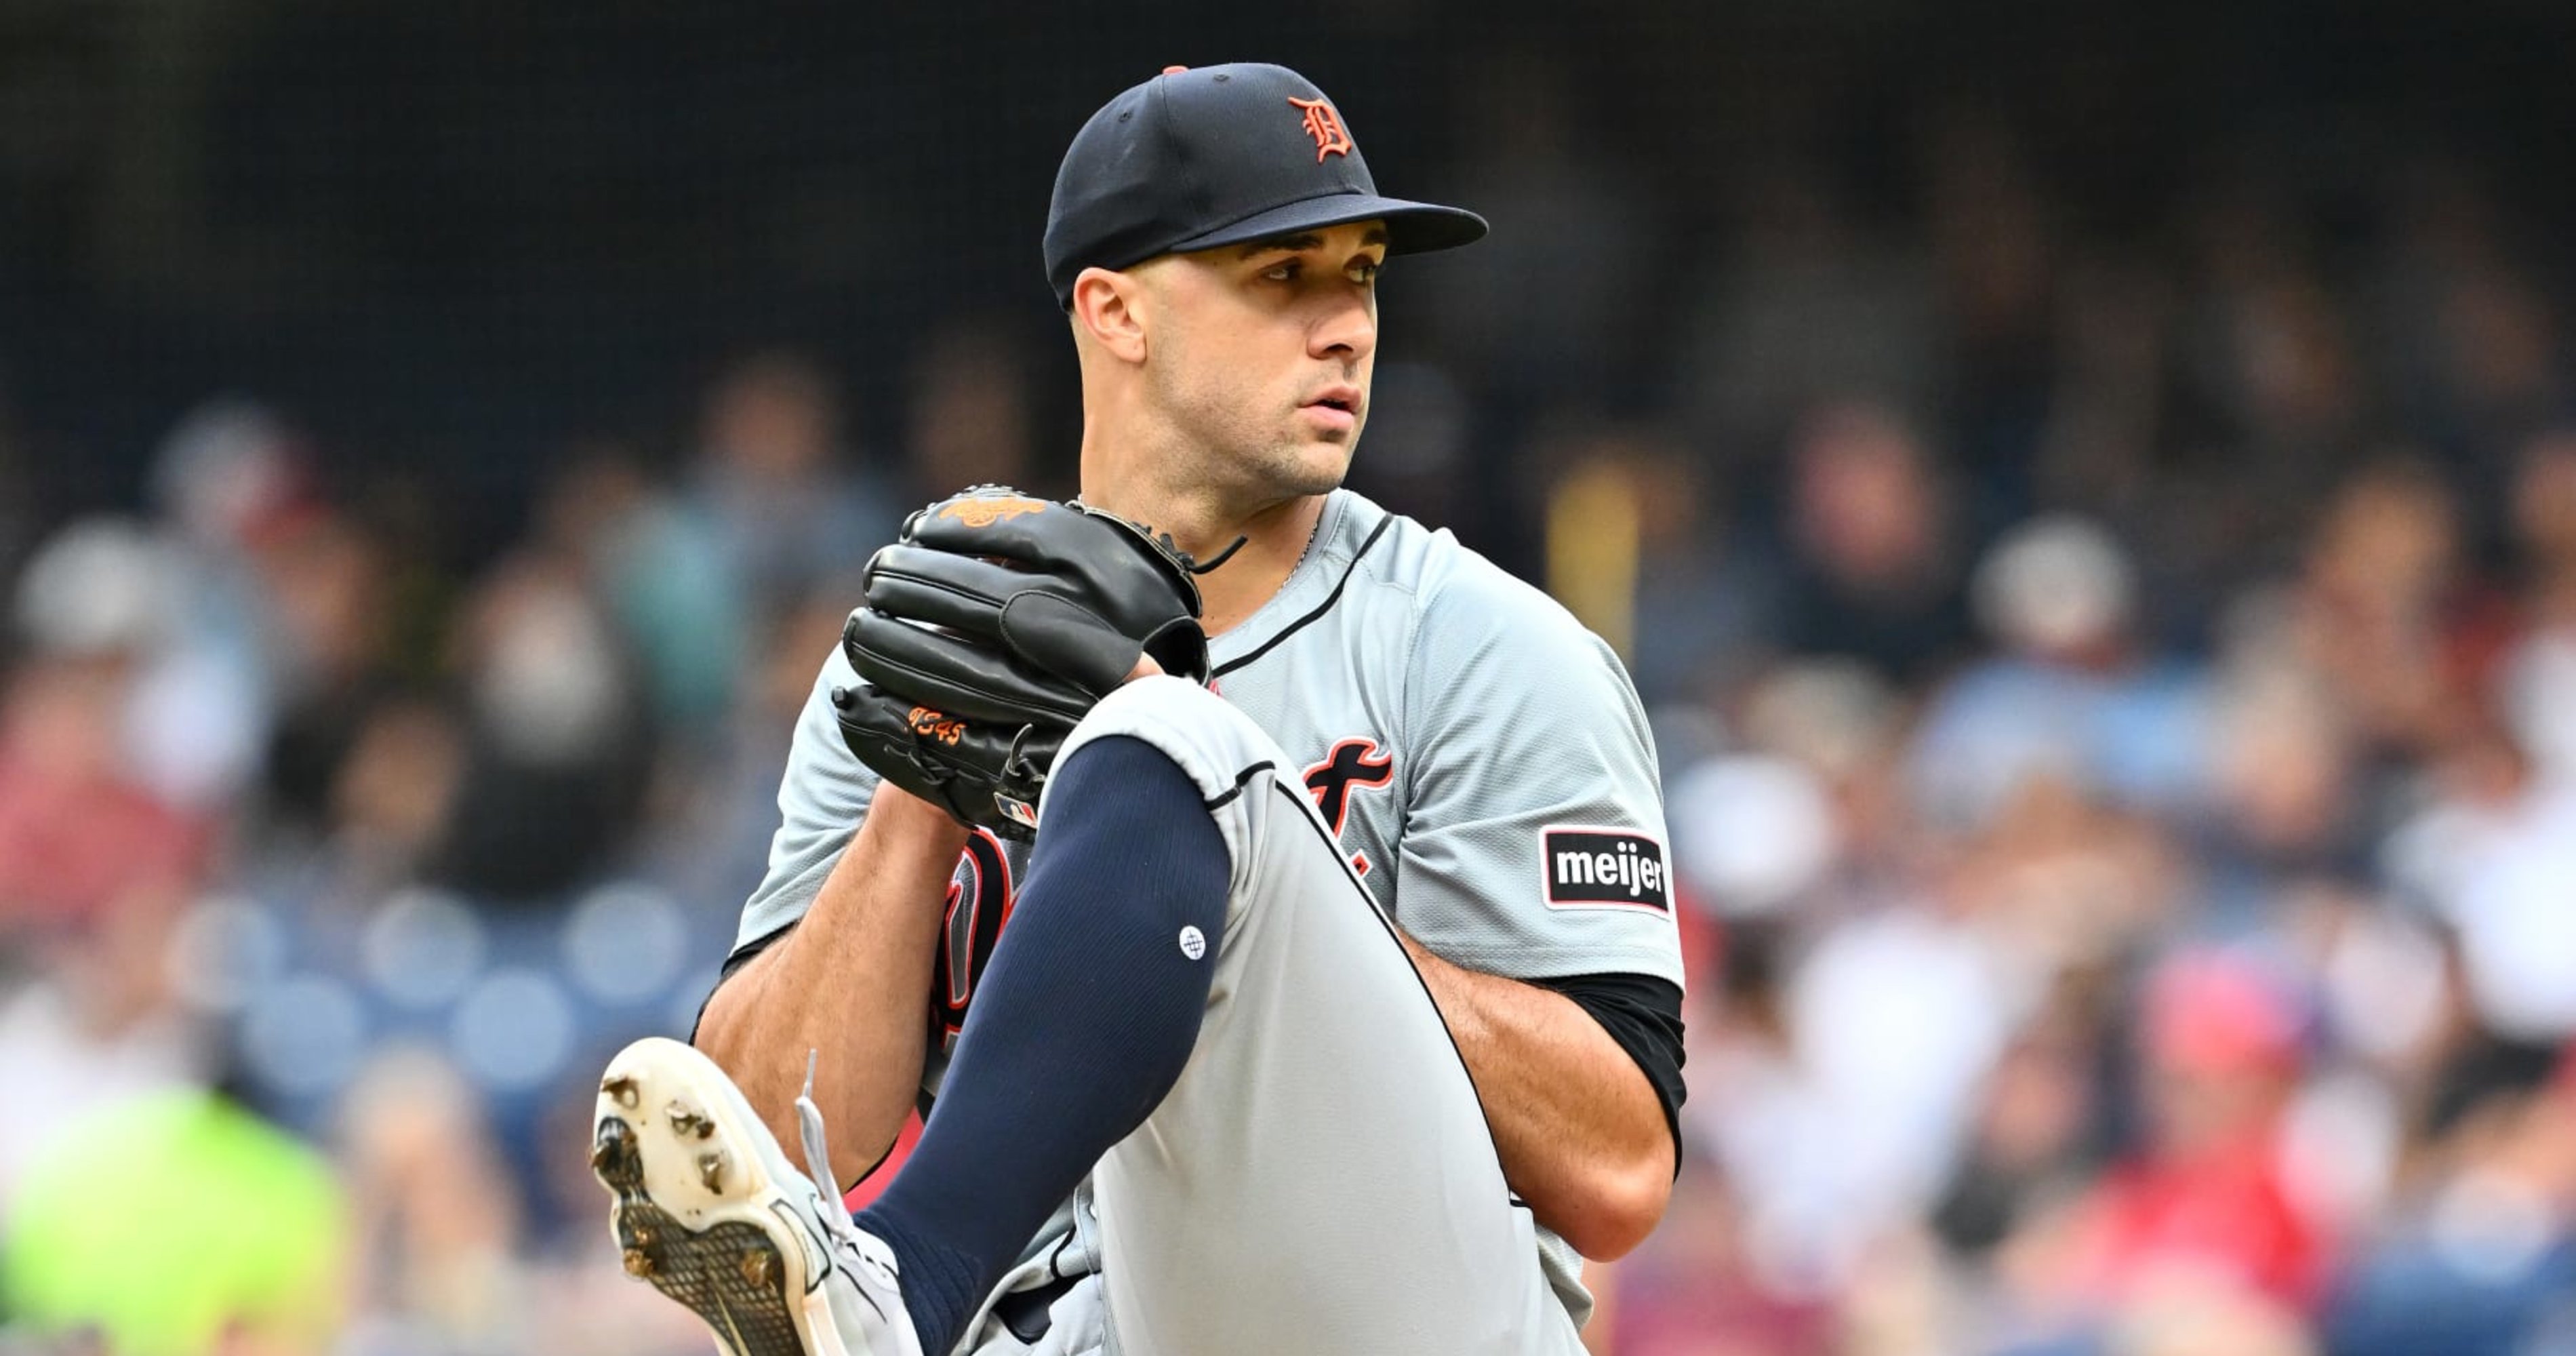 Jack Flaherty to Wear No. 0 Dodgers Jersey After Trade from Tigers at Deadline